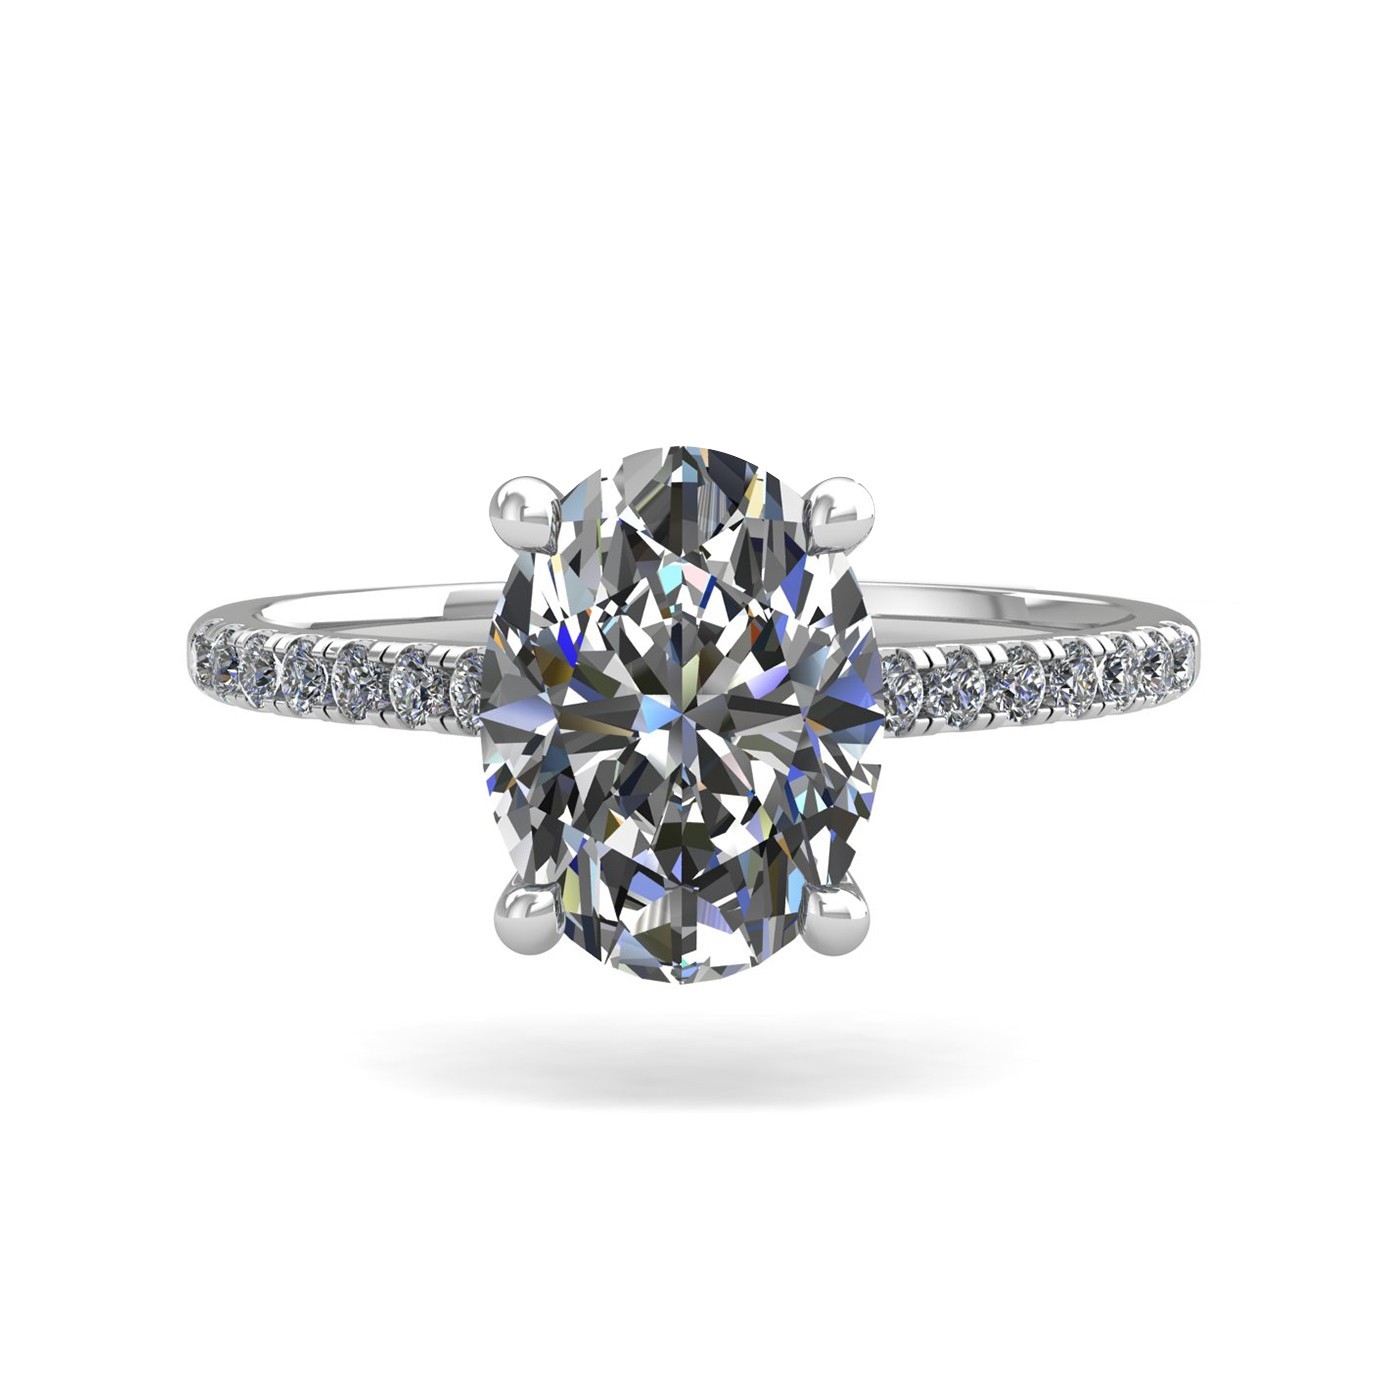 18k white gold  1,50 ct 4 prongs oval cut diamond engagement ring with whisper thin pavÉ set band